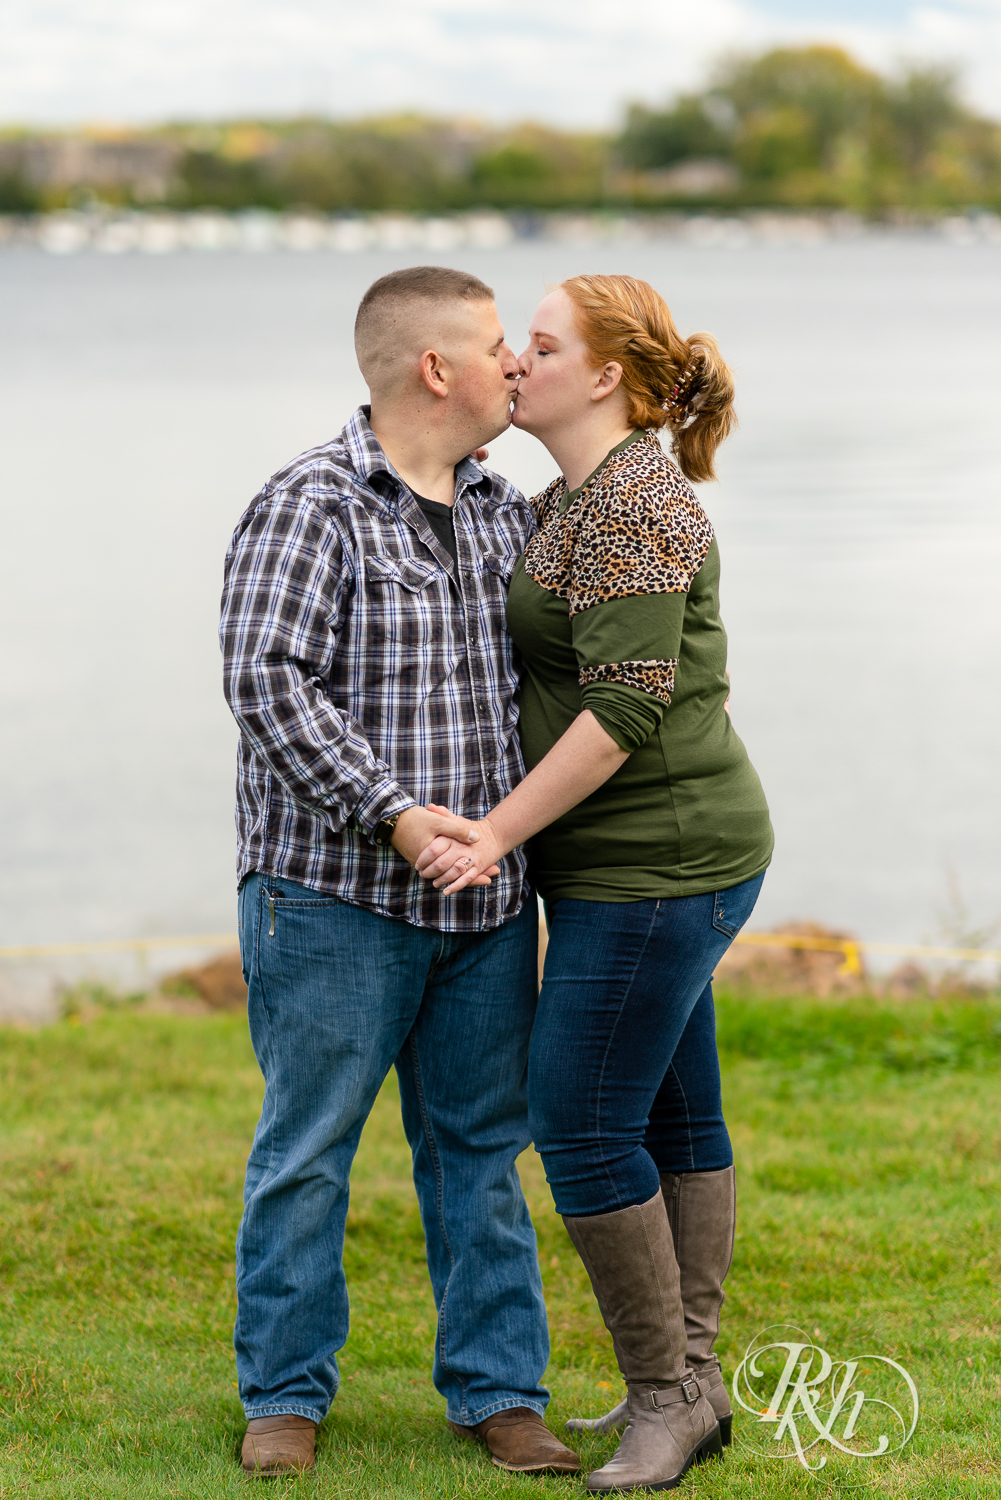 Man in flannel and jeans kisses woman in sweater and jeans in front of a lake in Excelsior, Minnesota.